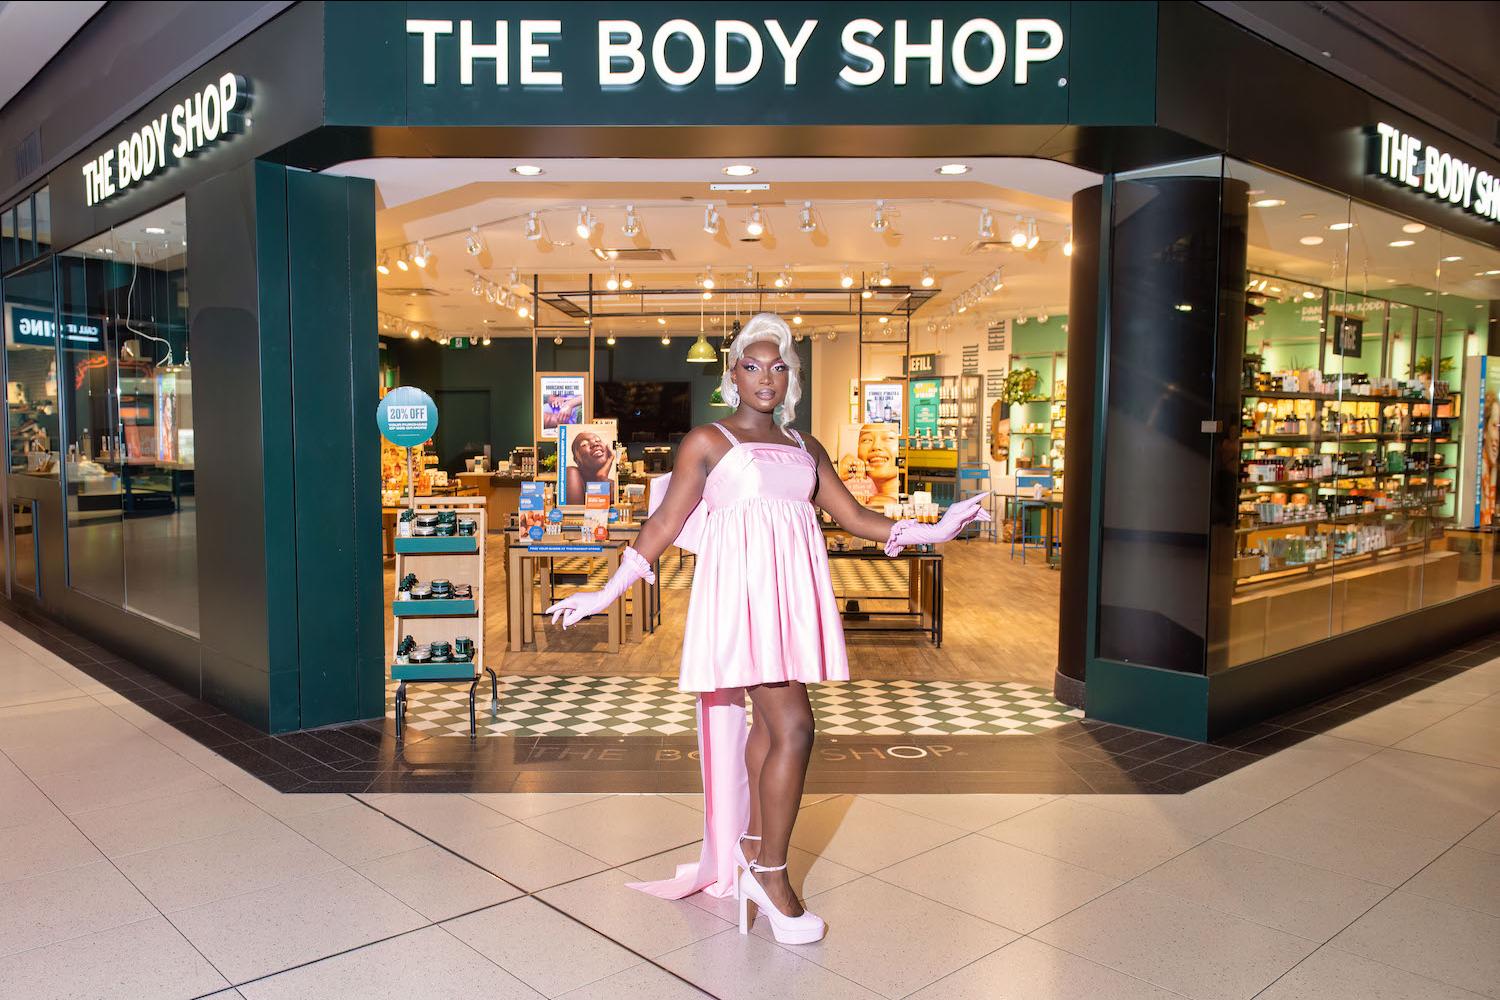 Makayla Couture at The Body Shop for Pride Month - support of drag performers and LGBTQ pride